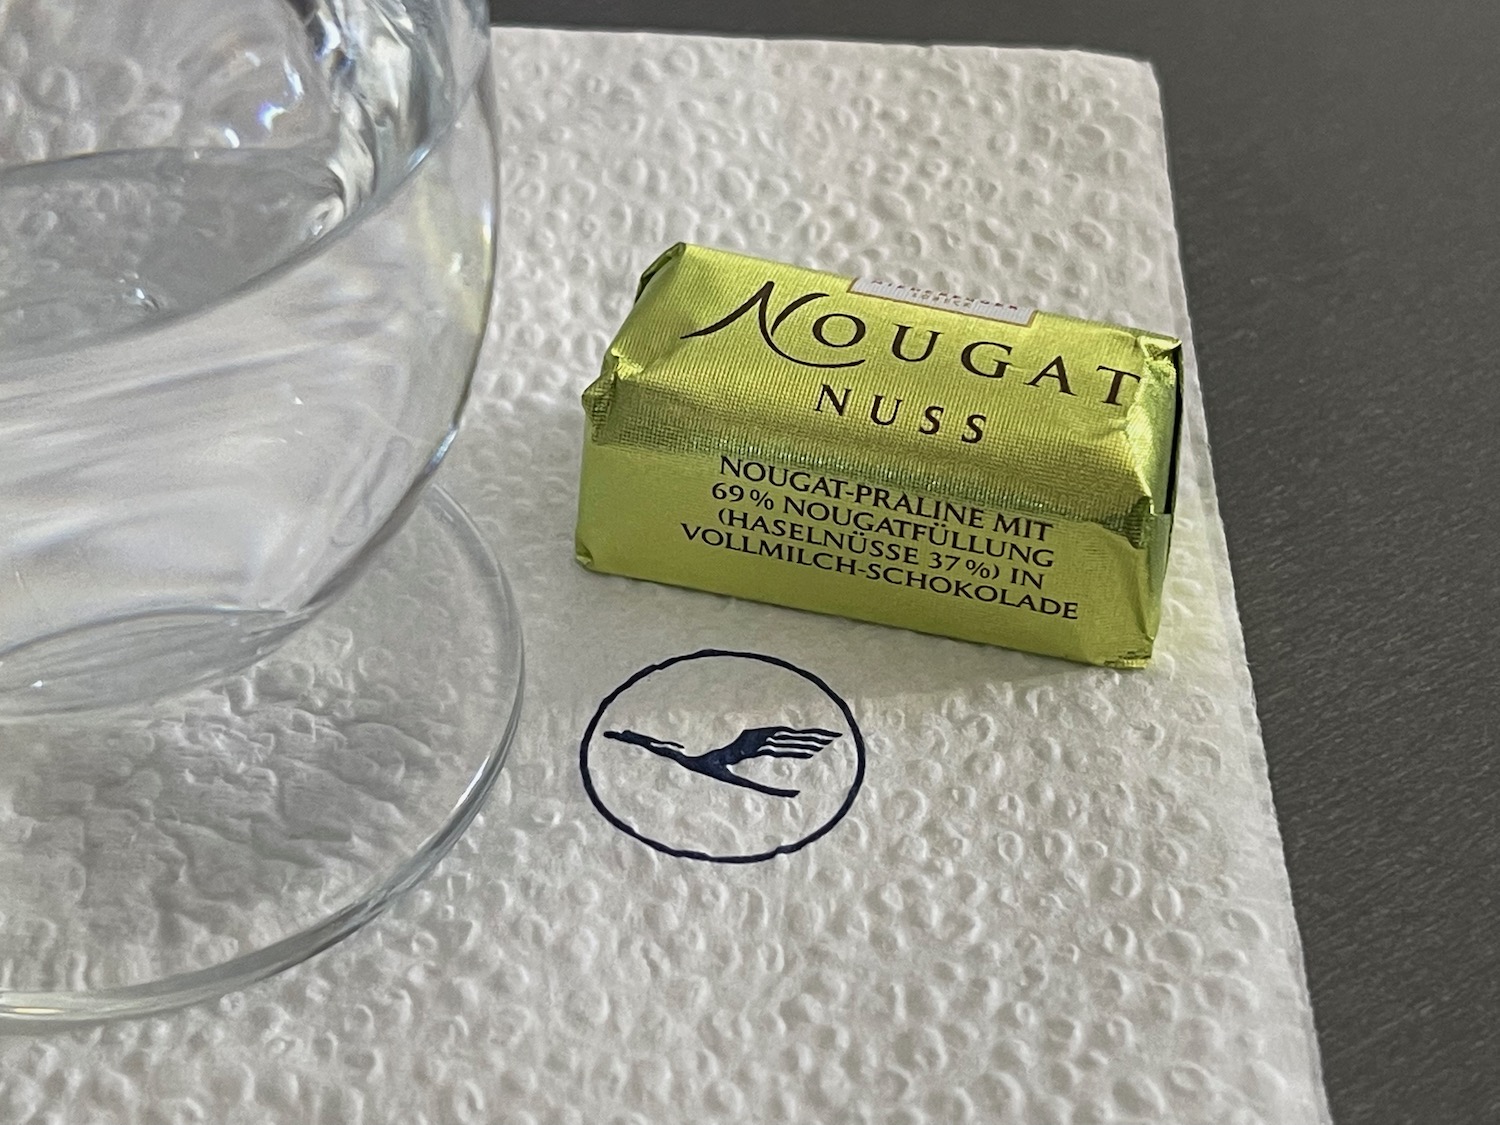 a small package of chocolate on a napkin